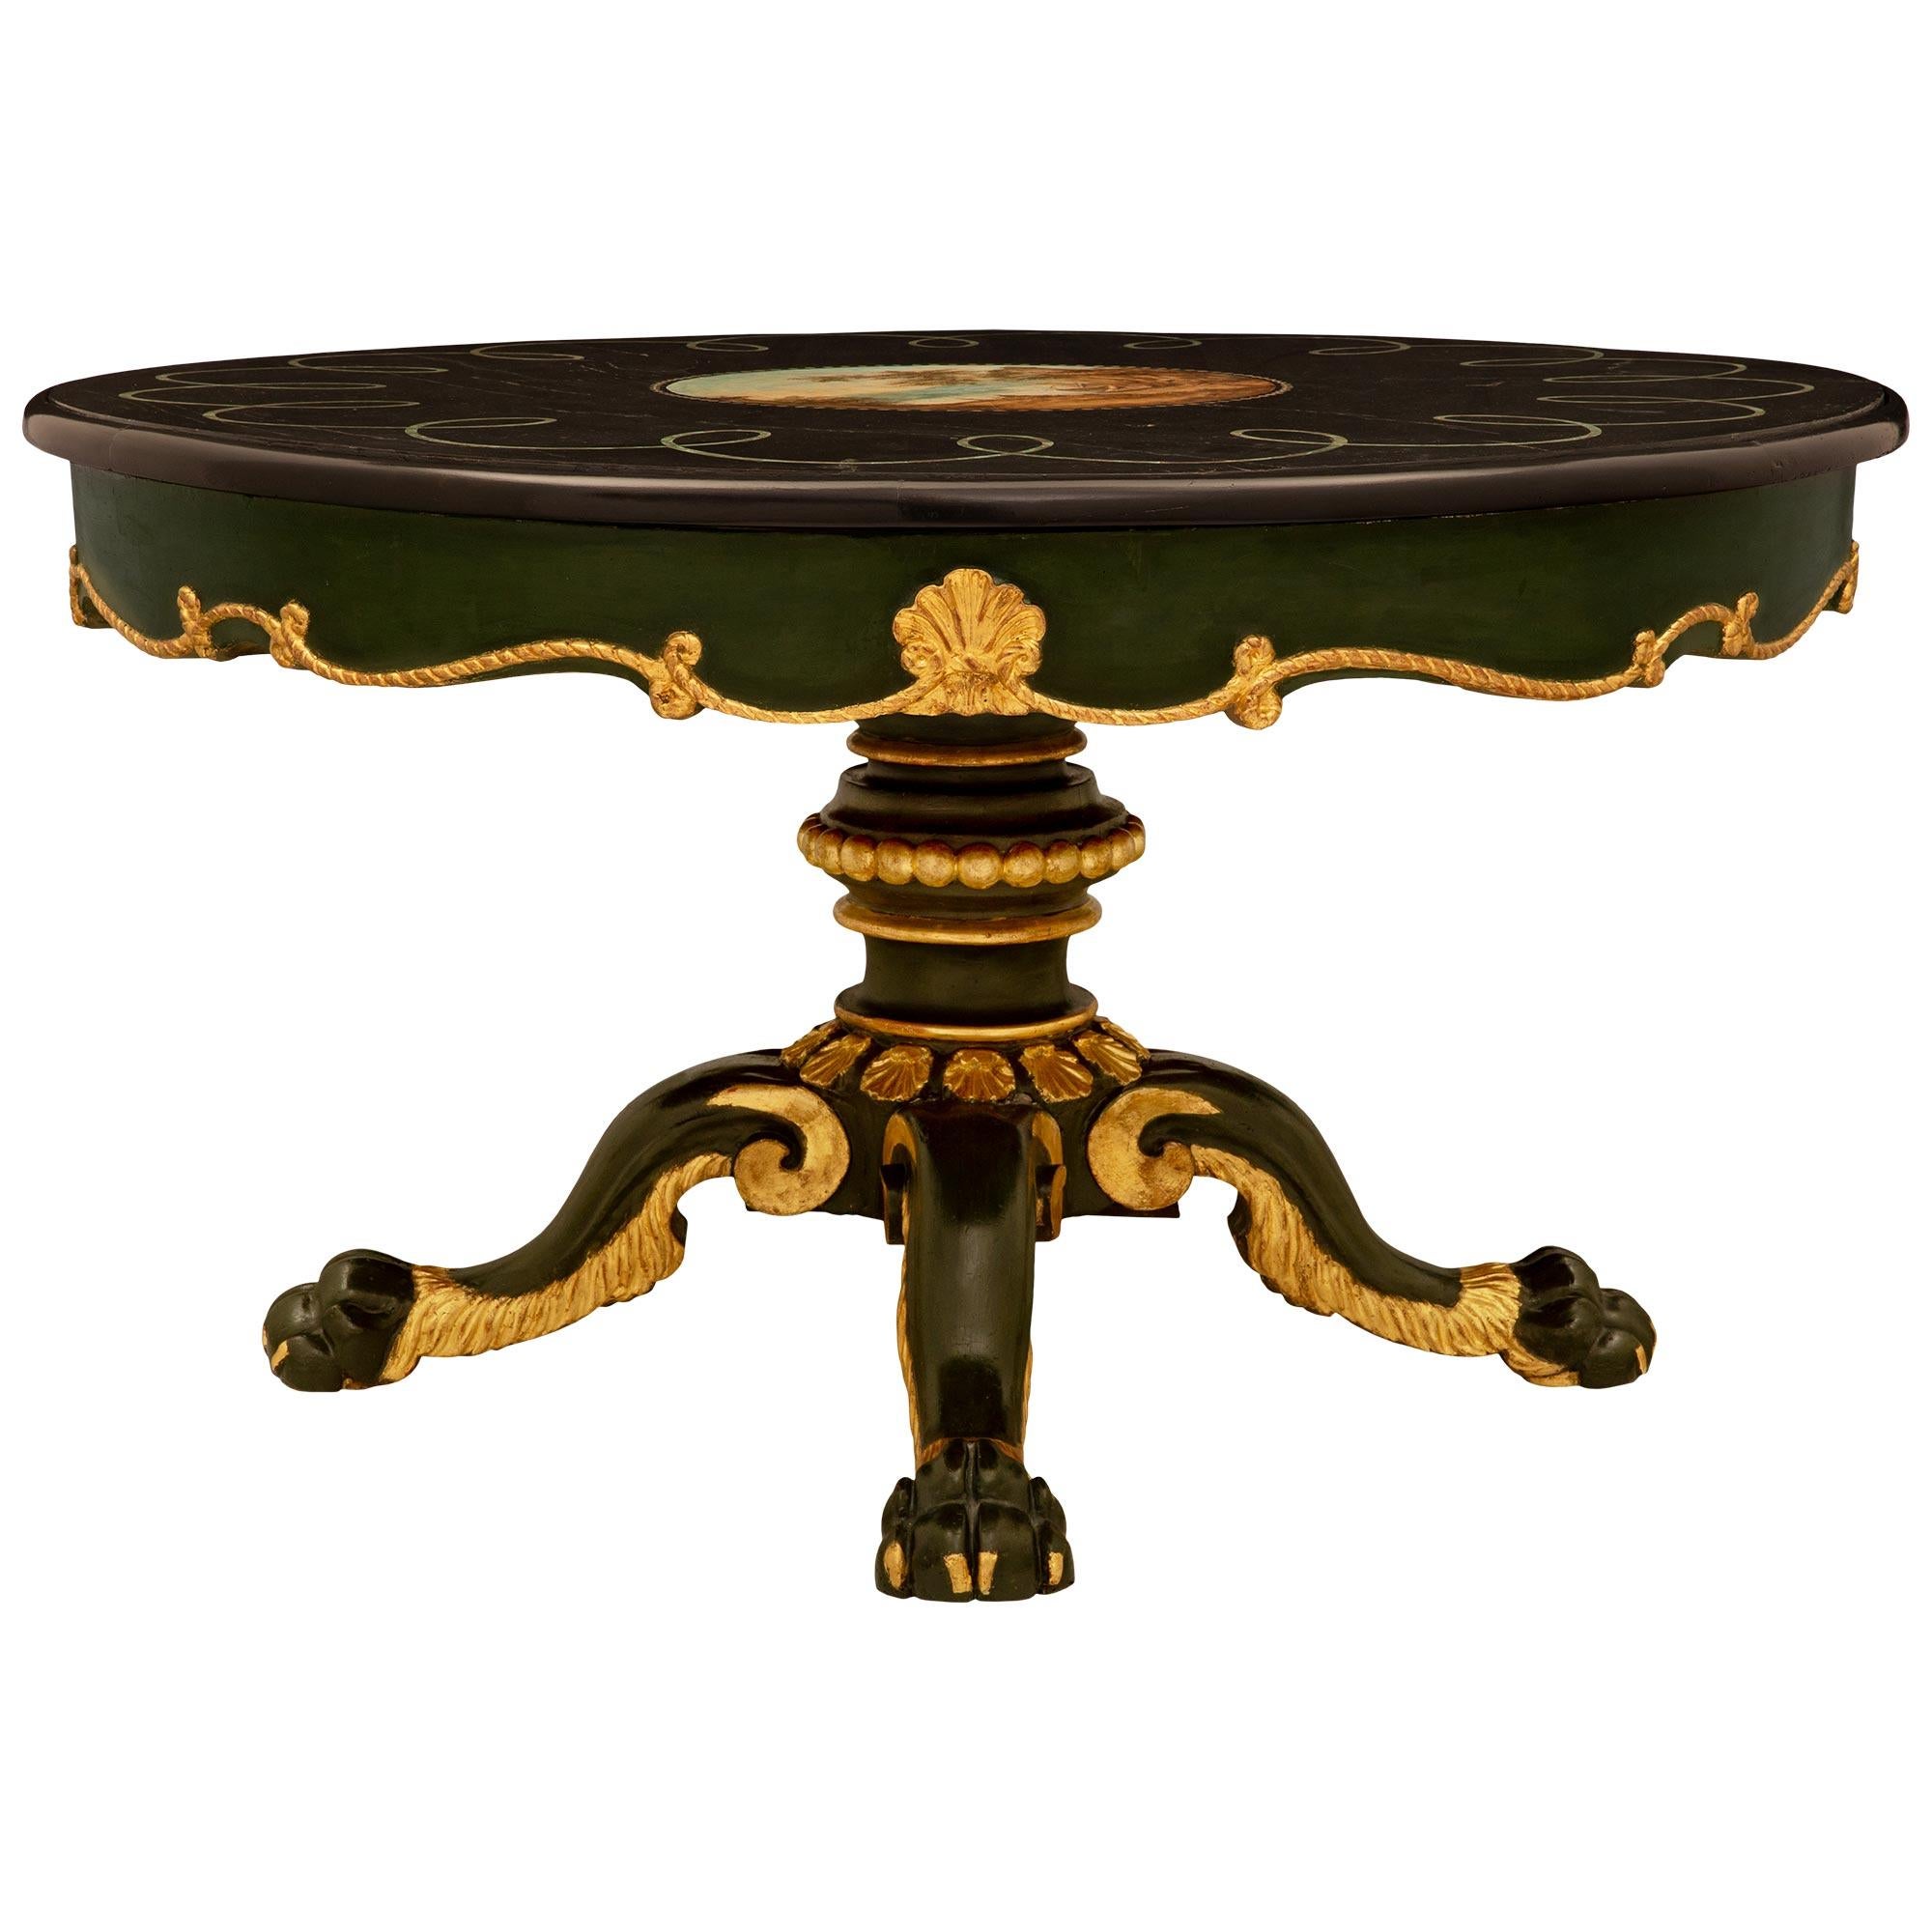 An impressive and large scale Italian 19th century Baroque st. polychrome, giltwood and Scagliola center table. The circular table is raised by elegantly scrolled polychrome legs with handsome paw feet decorated with fine giltwood accents and superb